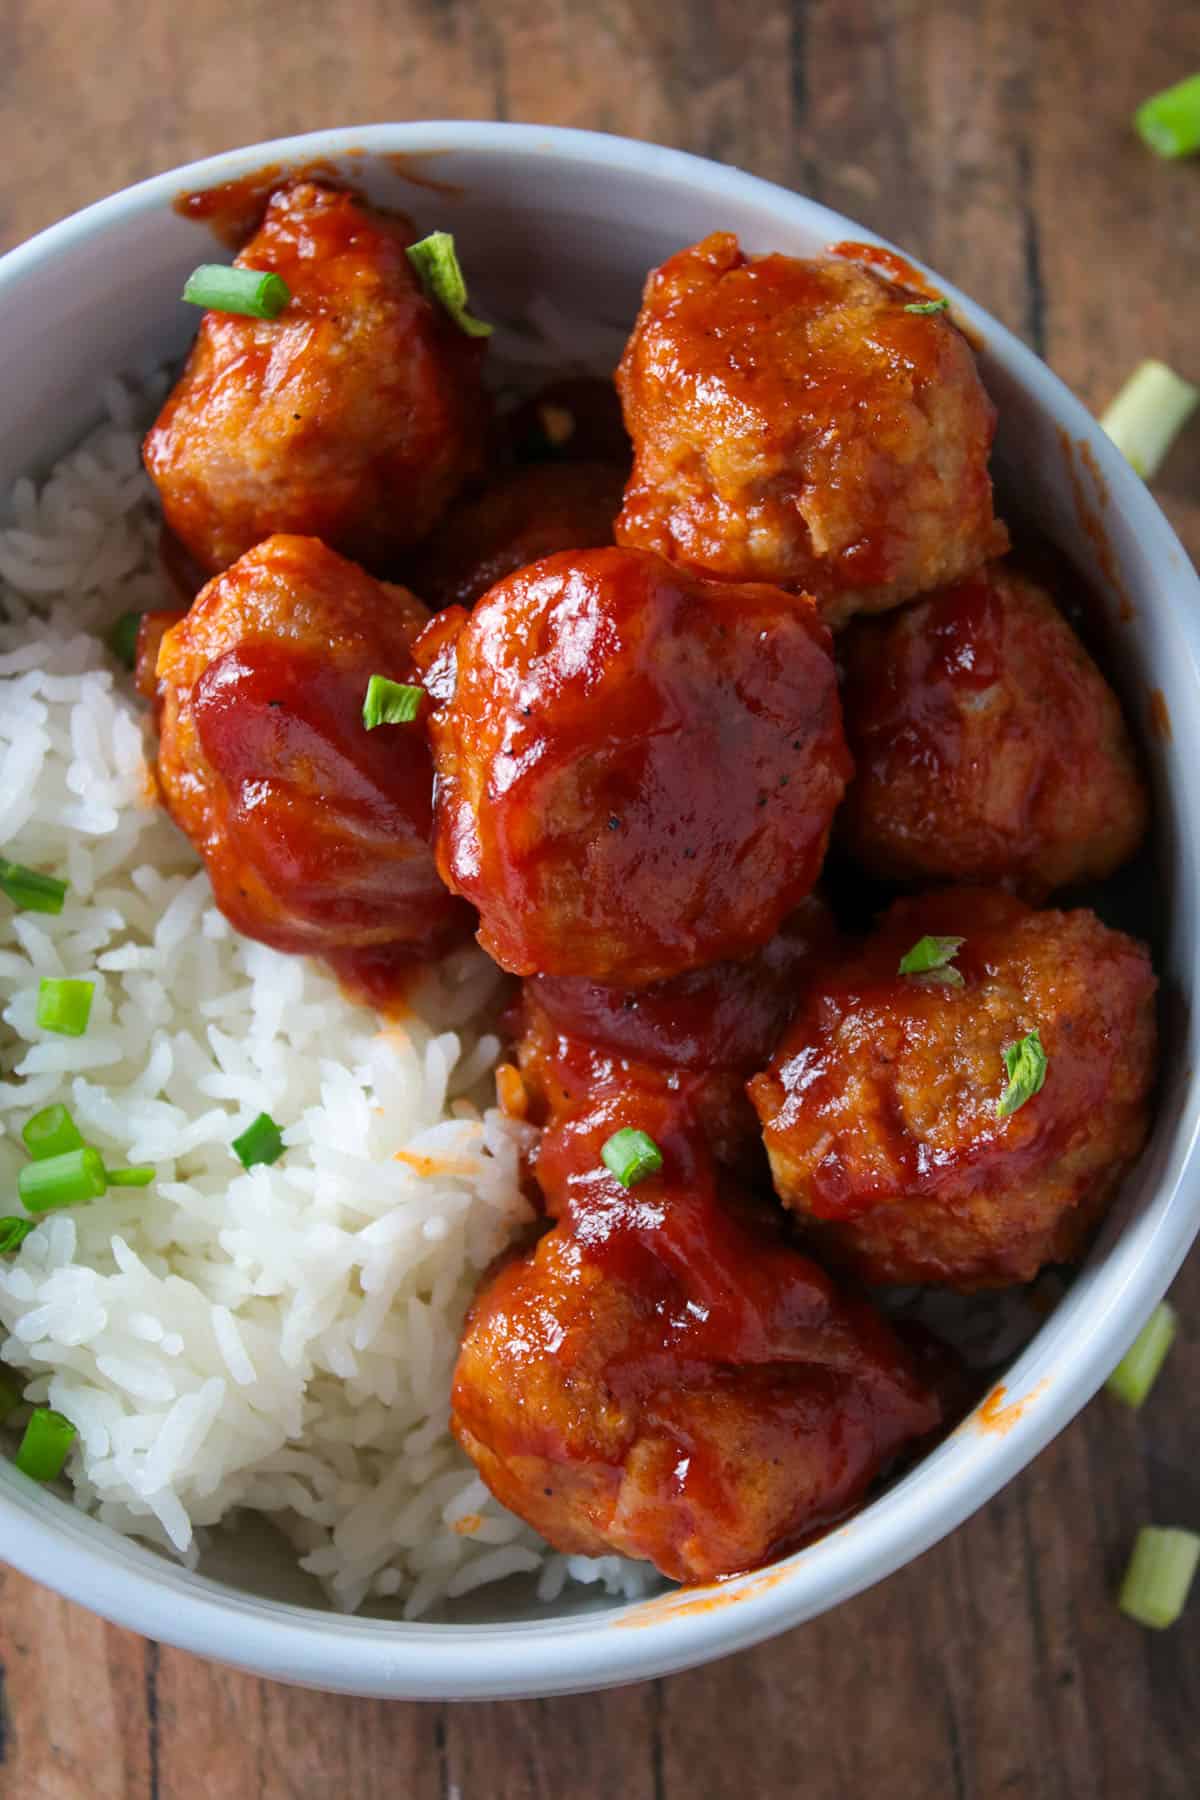 Top angle shot of baked chicken meatballs in a bowl with rice.